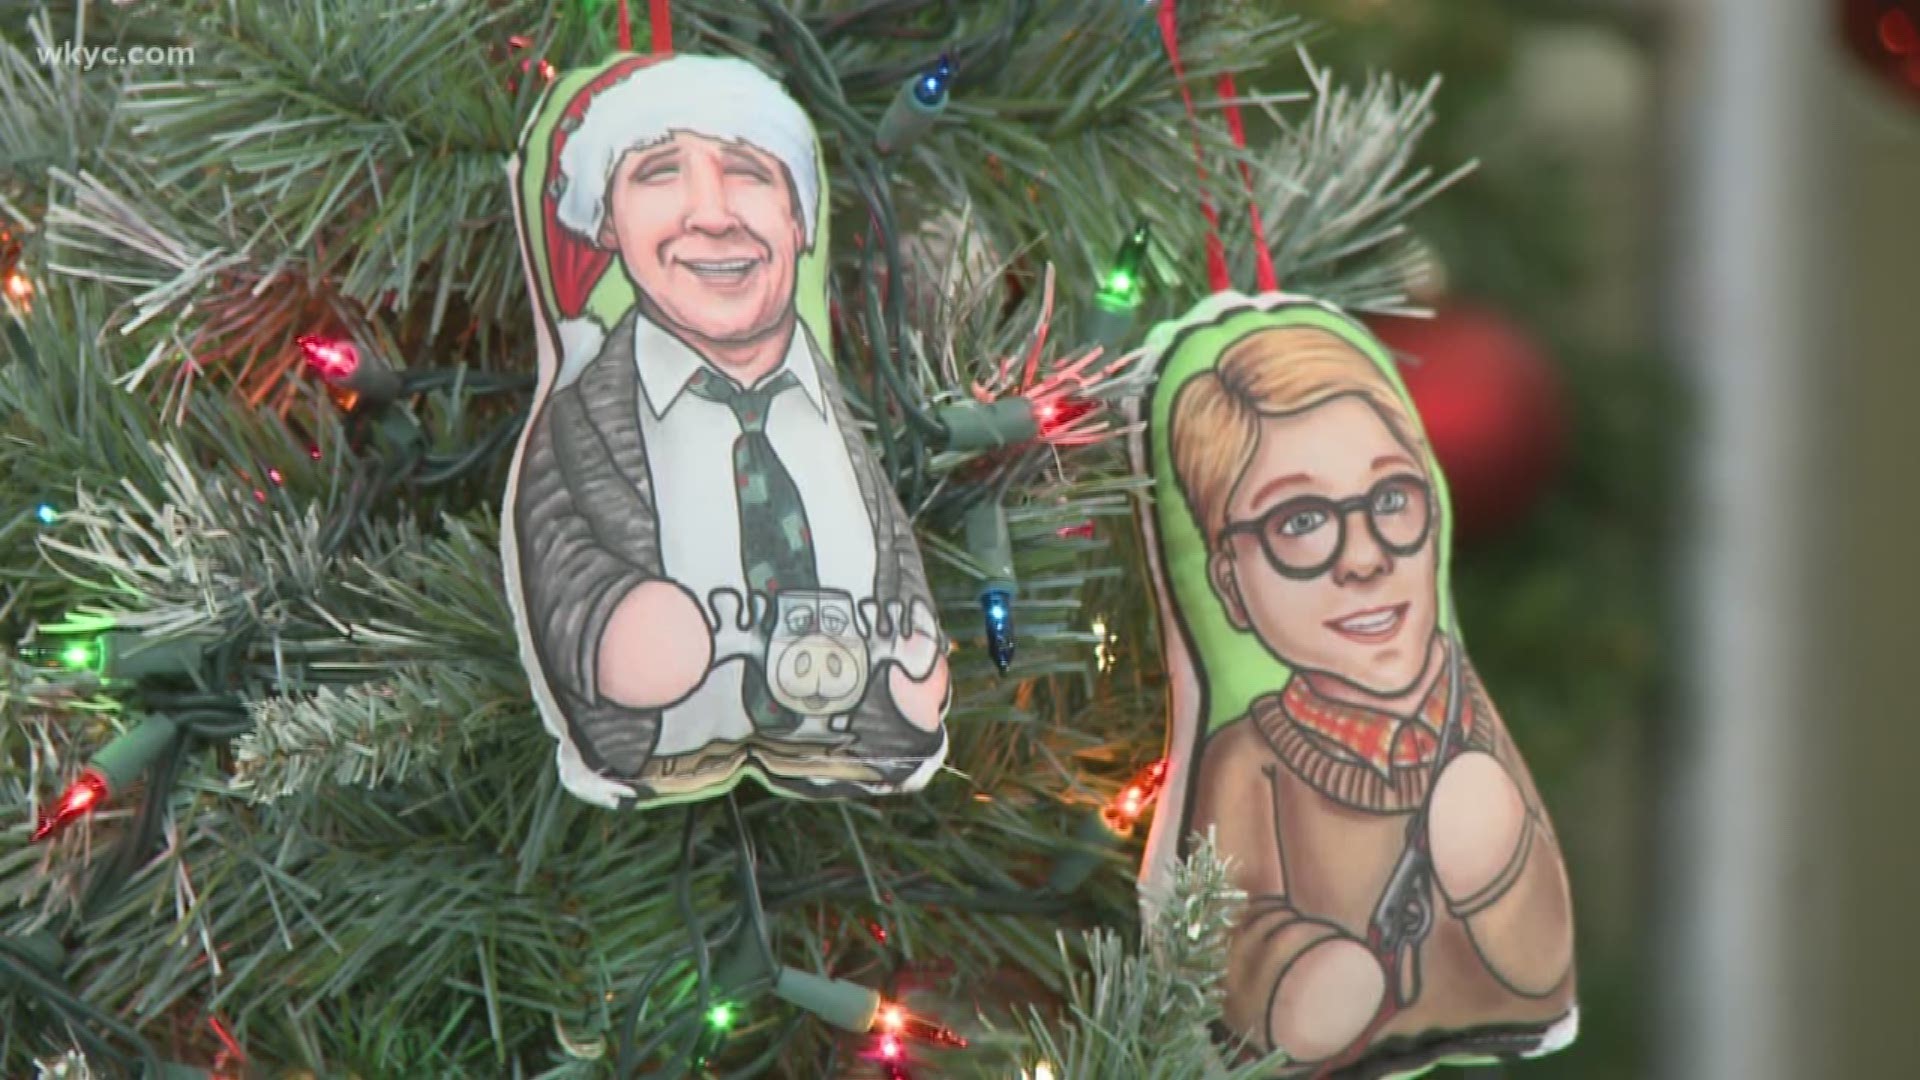 Dec. 9, 2019: Here's your chance to win these special Cleveland-created Christmas ornaments from the Cuddle Cult.